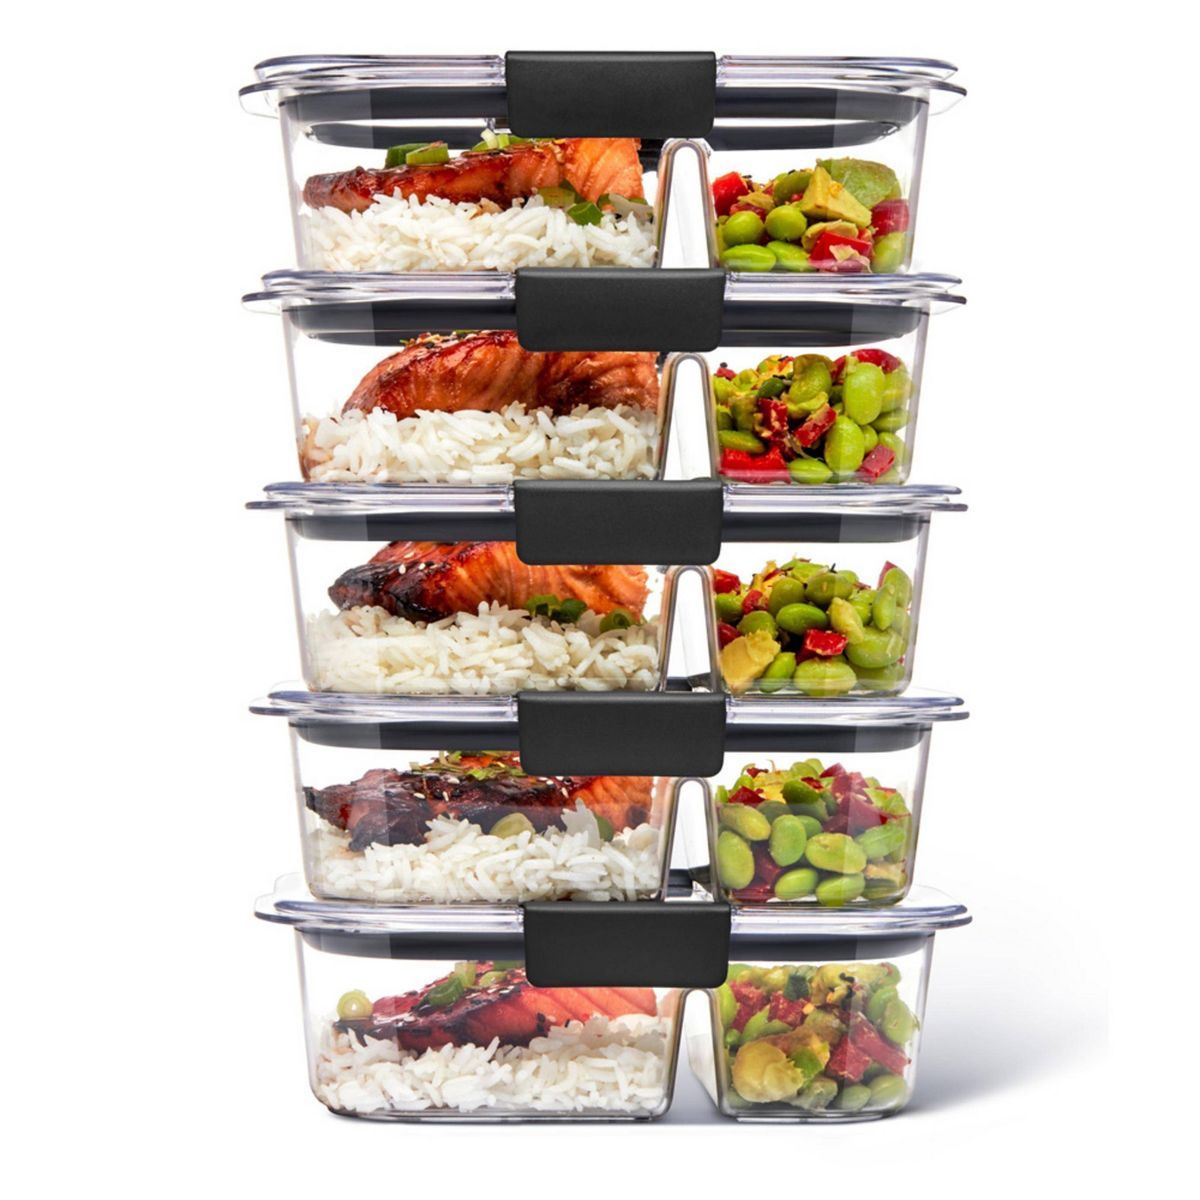 Rubbermaid 5pk 2.85 cup Brilliance Meal Prep Containers, 2-Compartment Food Storage Containers | Target